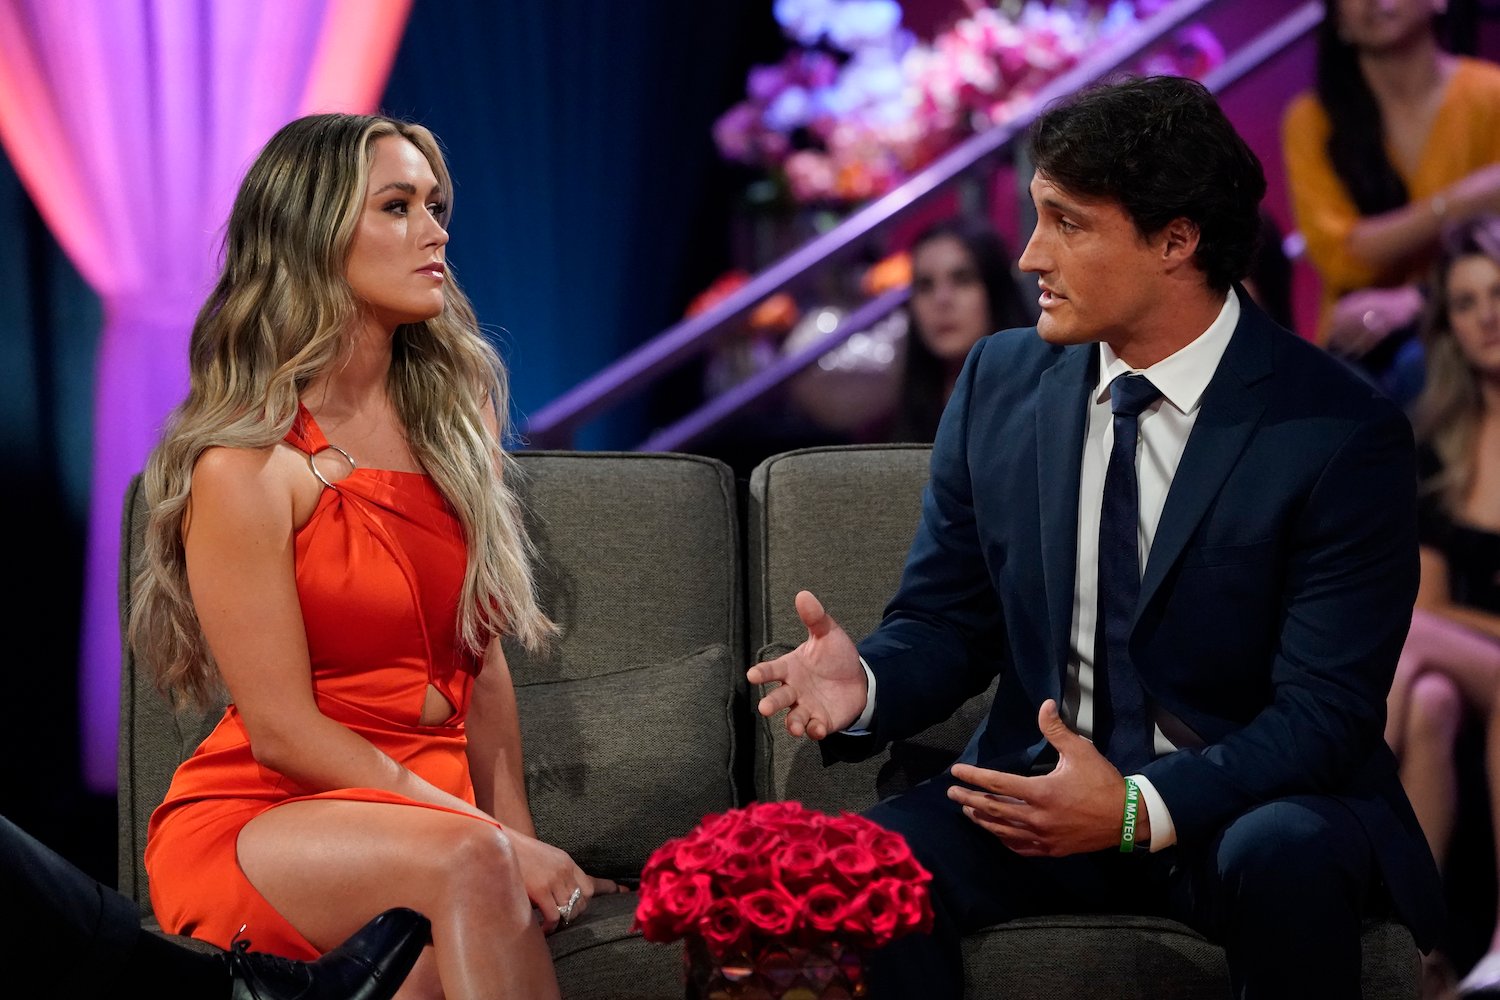 Rachel Recchia and Tino Franco in 'The Bachelorette' Season 19 finale and After the Final Rose special